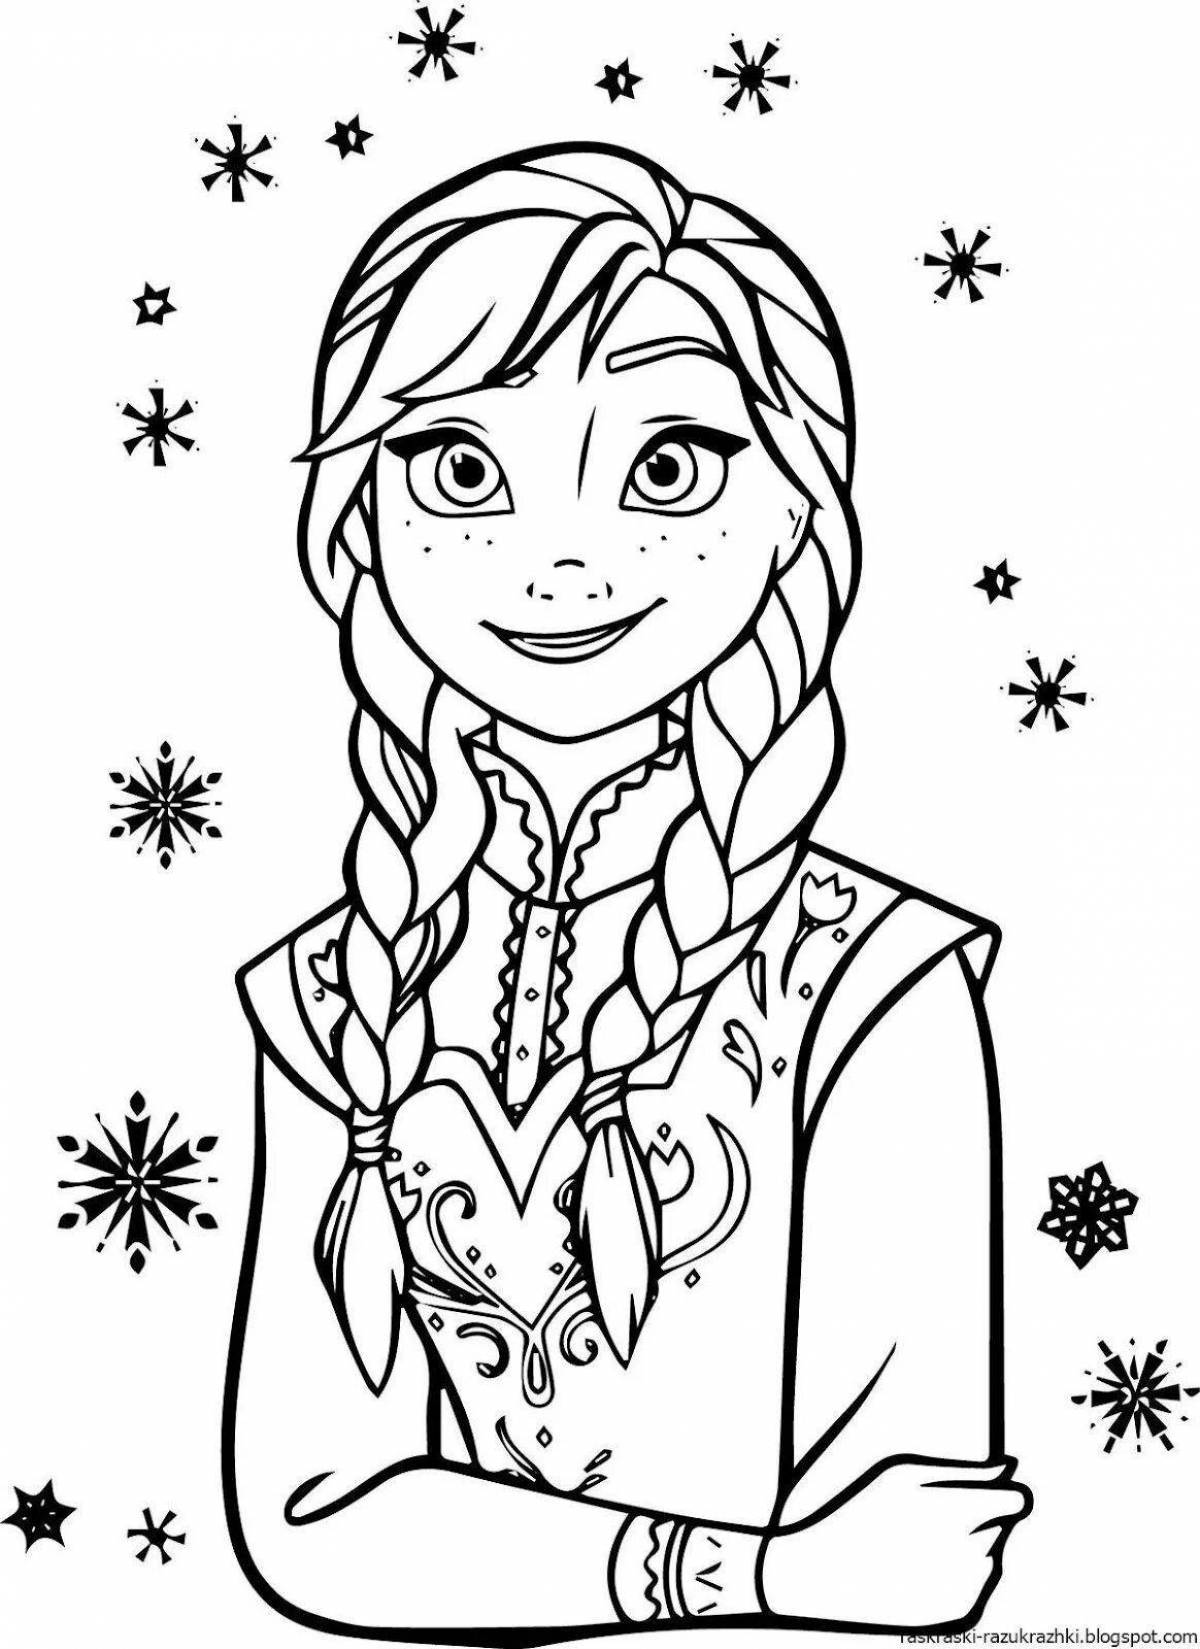 Great elsa coloring book for kids 5-6 years old